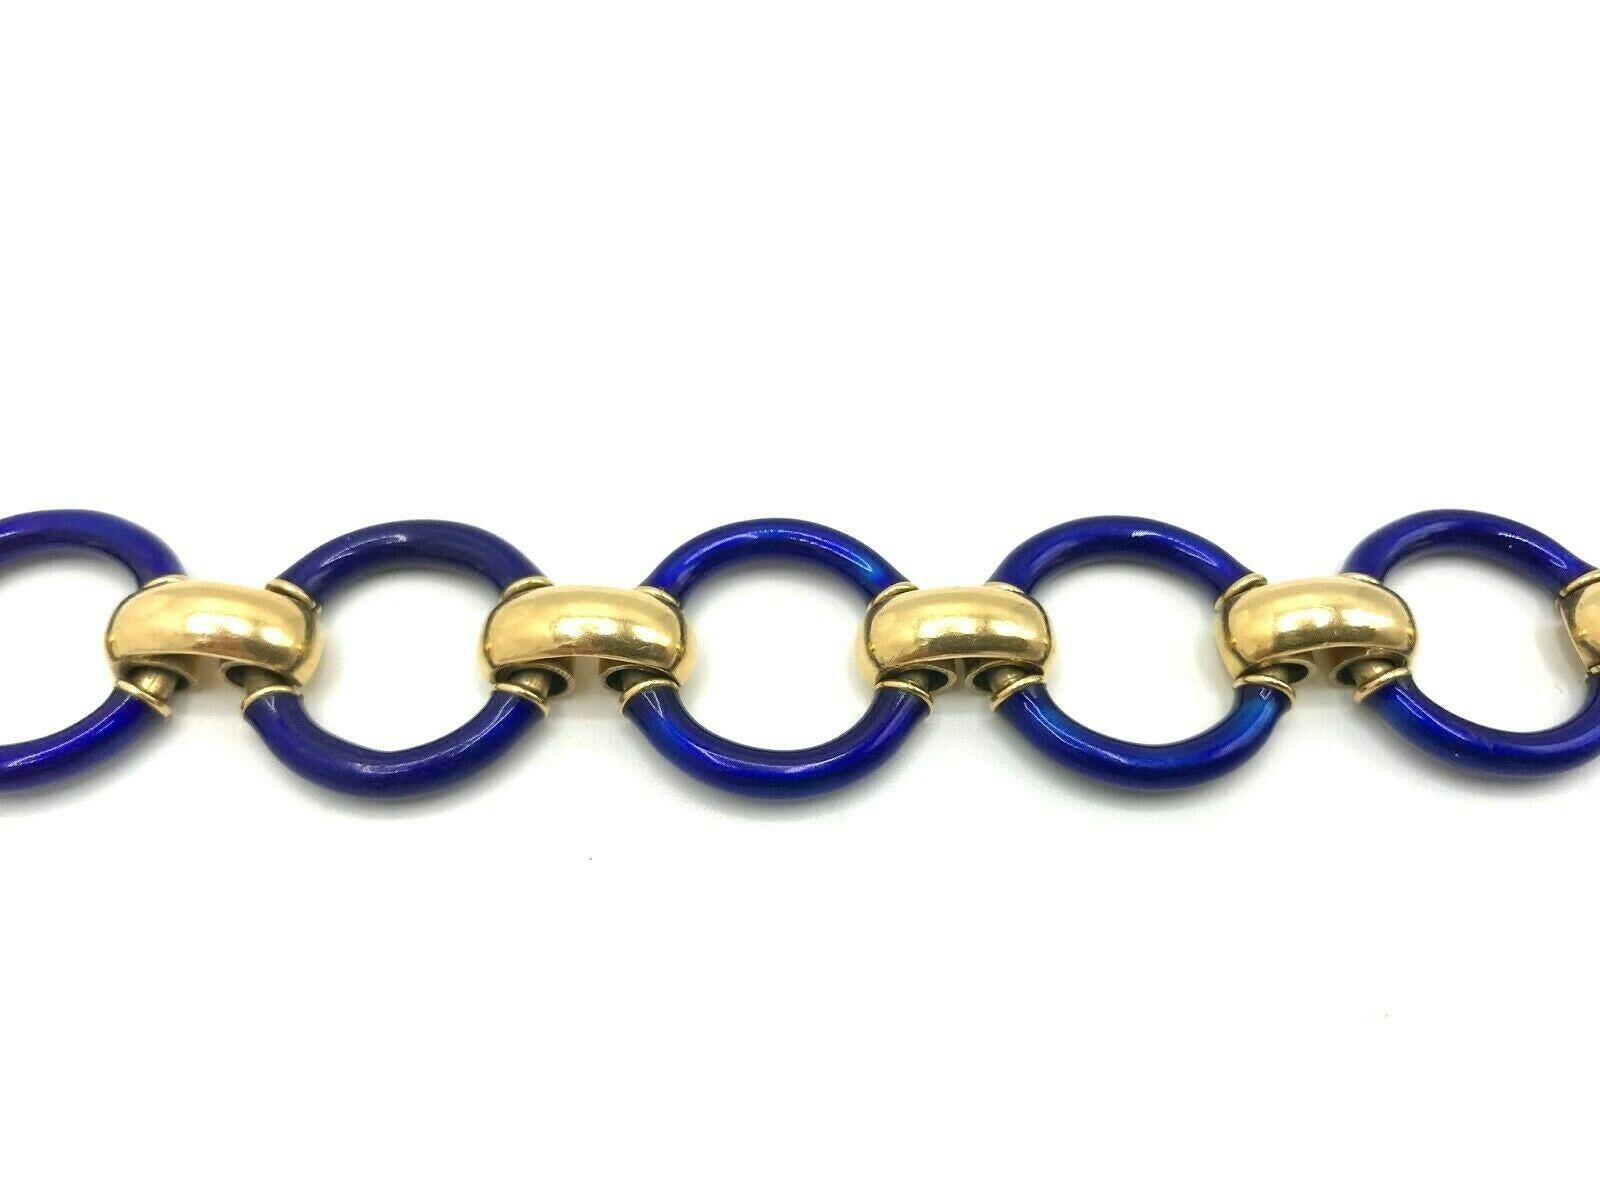 Bright beautiful vintage bracelet made of blue enamel links connected with 18k yellow gold parts. 
Stamped with a hallmark for 18k gold .
Measurements: 7.5